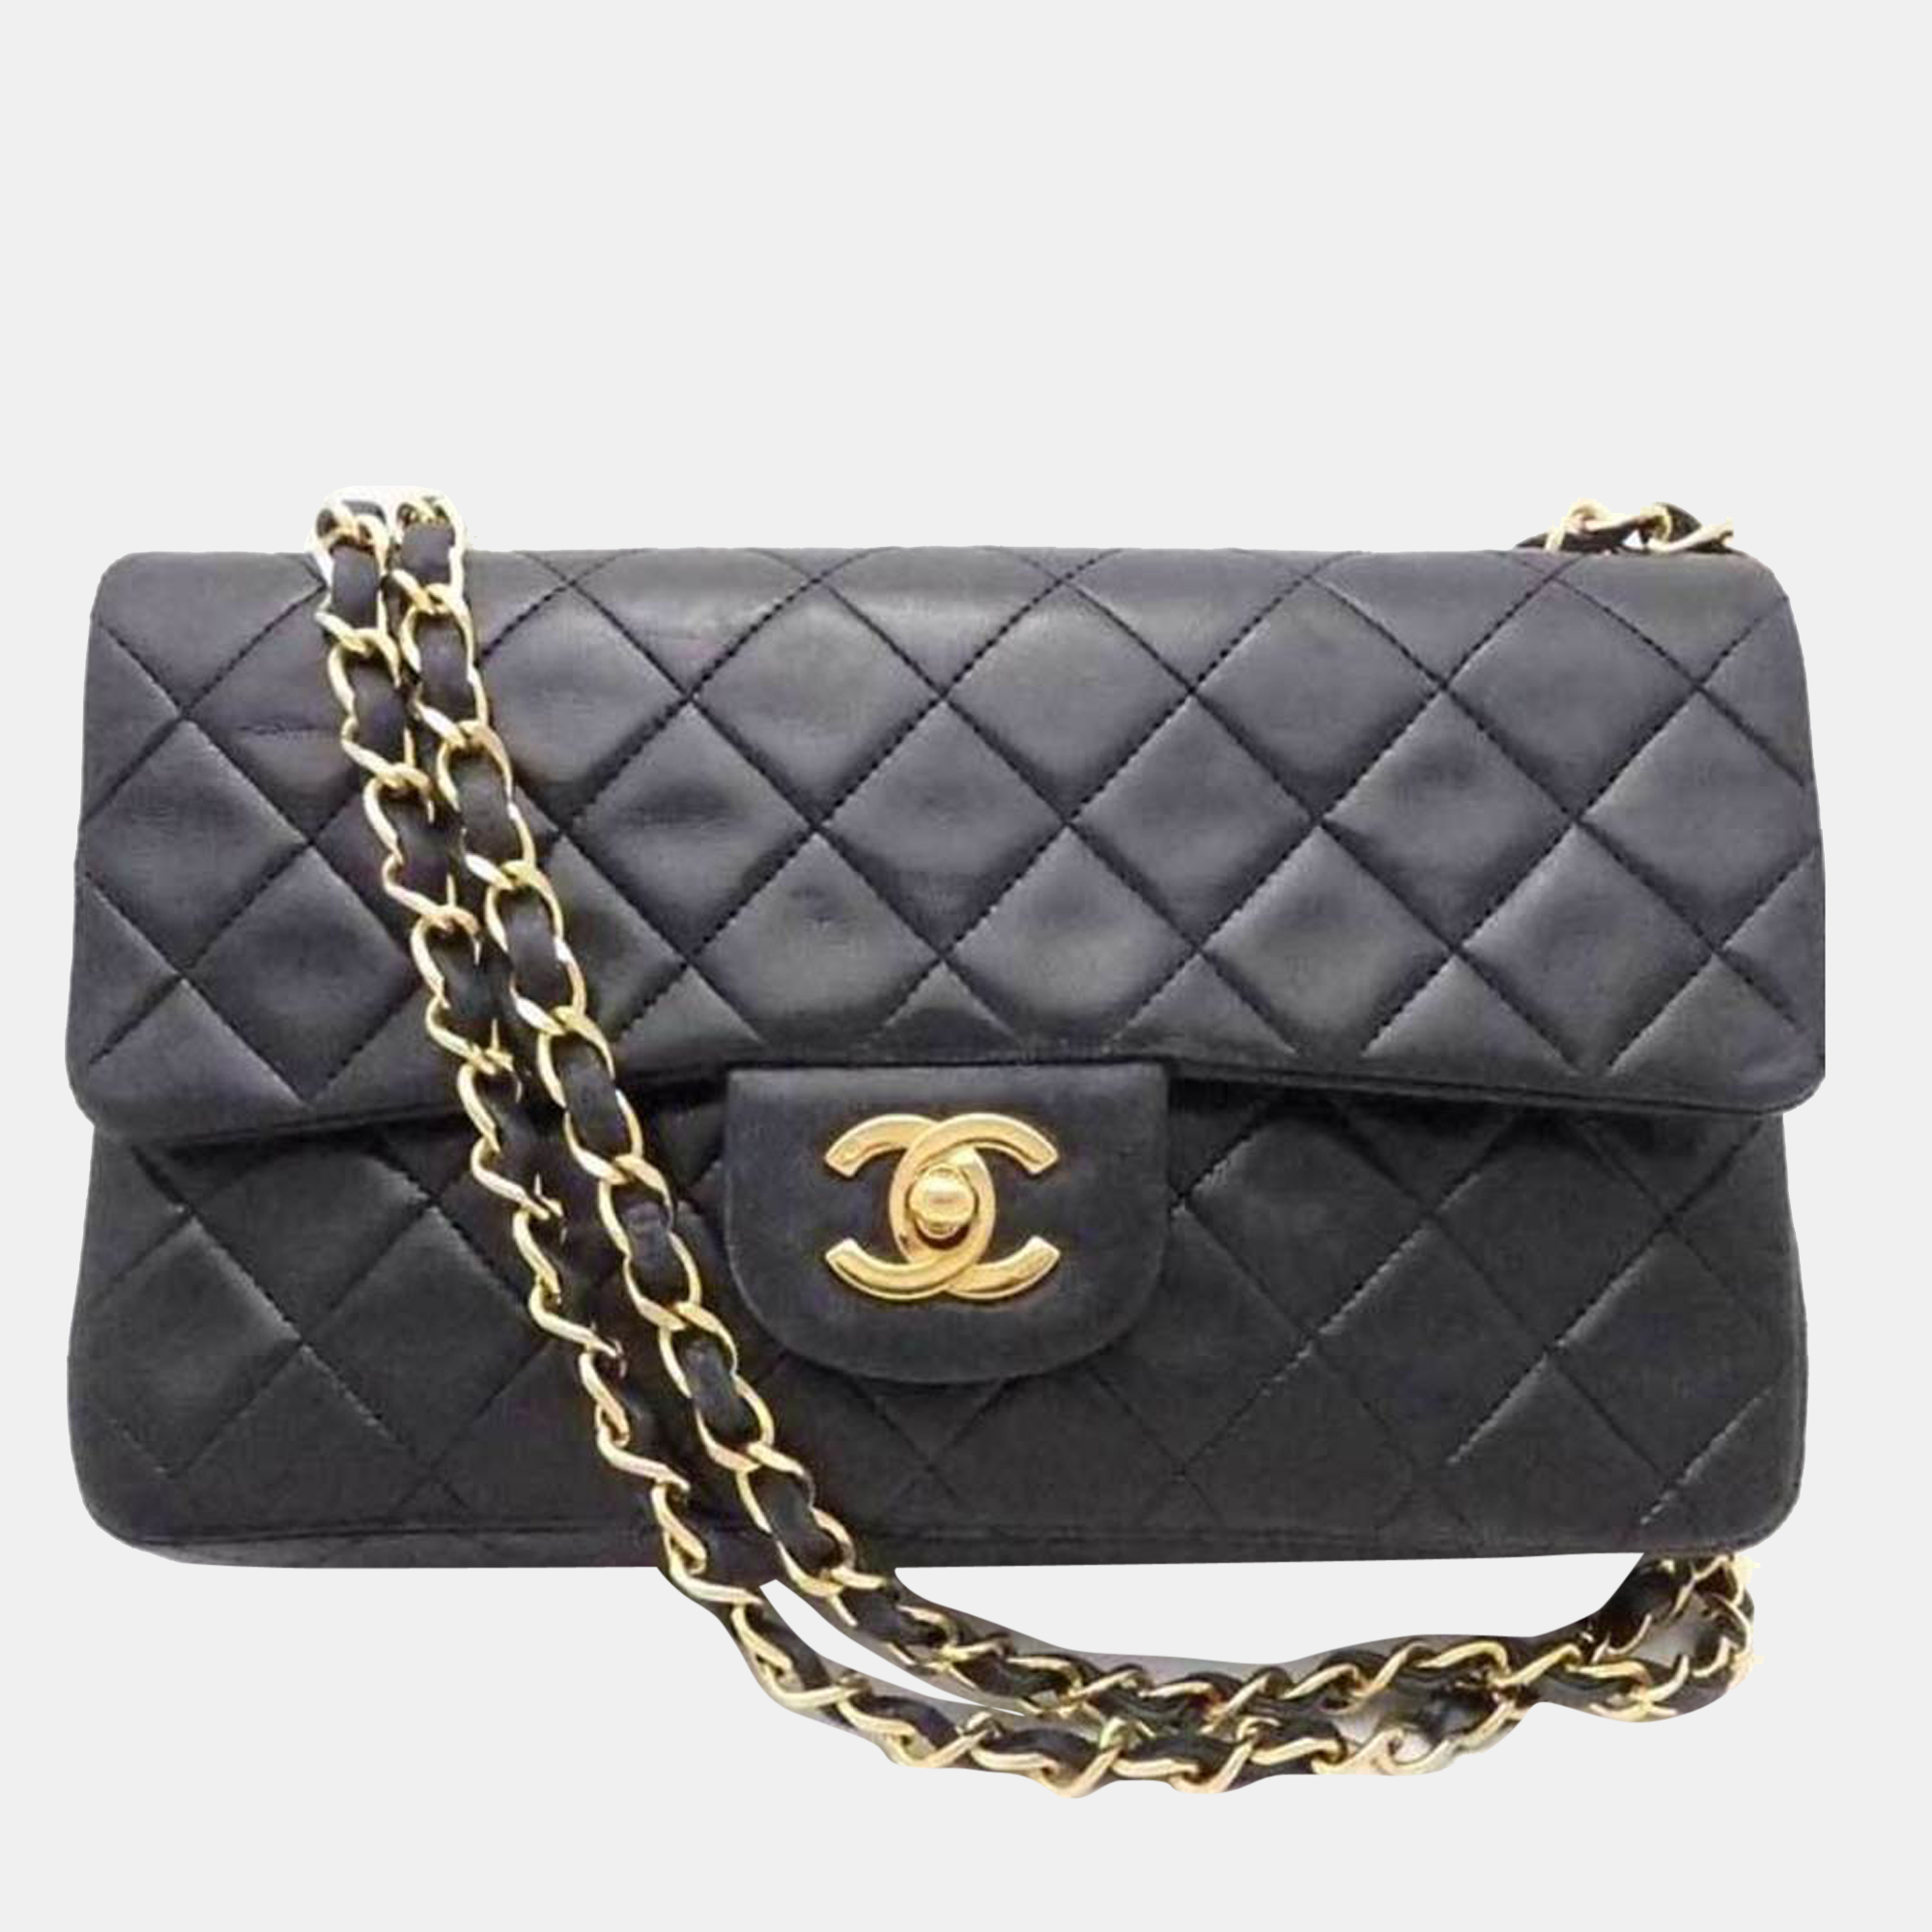 Chanel black leather small classic double flap shoulder bag